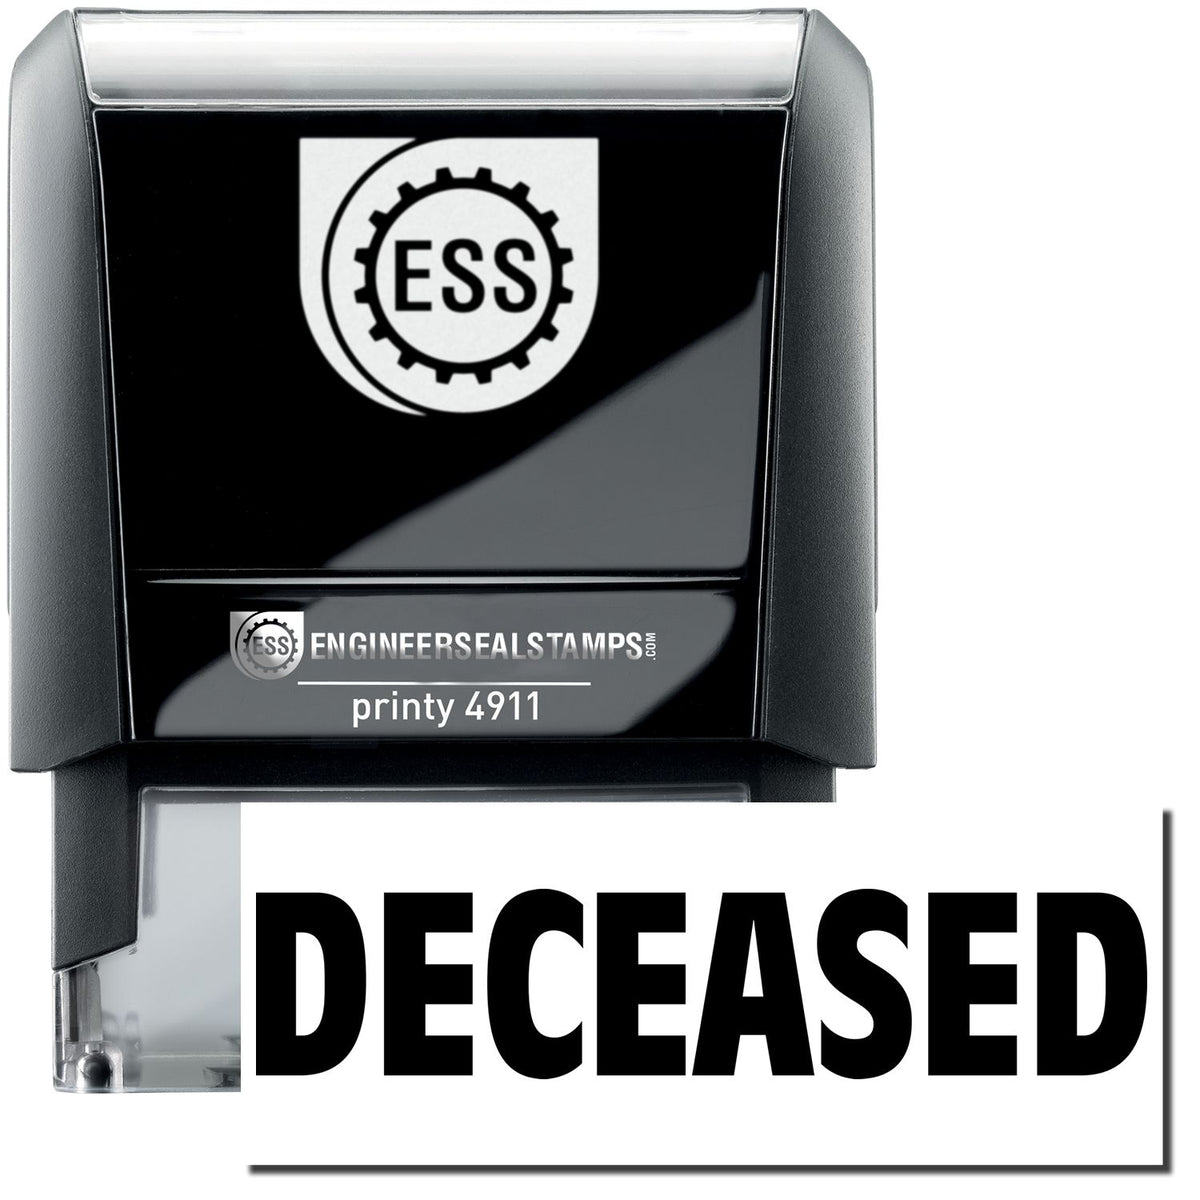 A self-inking stamp with a stamped image showing how the text &quot;DECEASED&quot; is displayed after stamping.